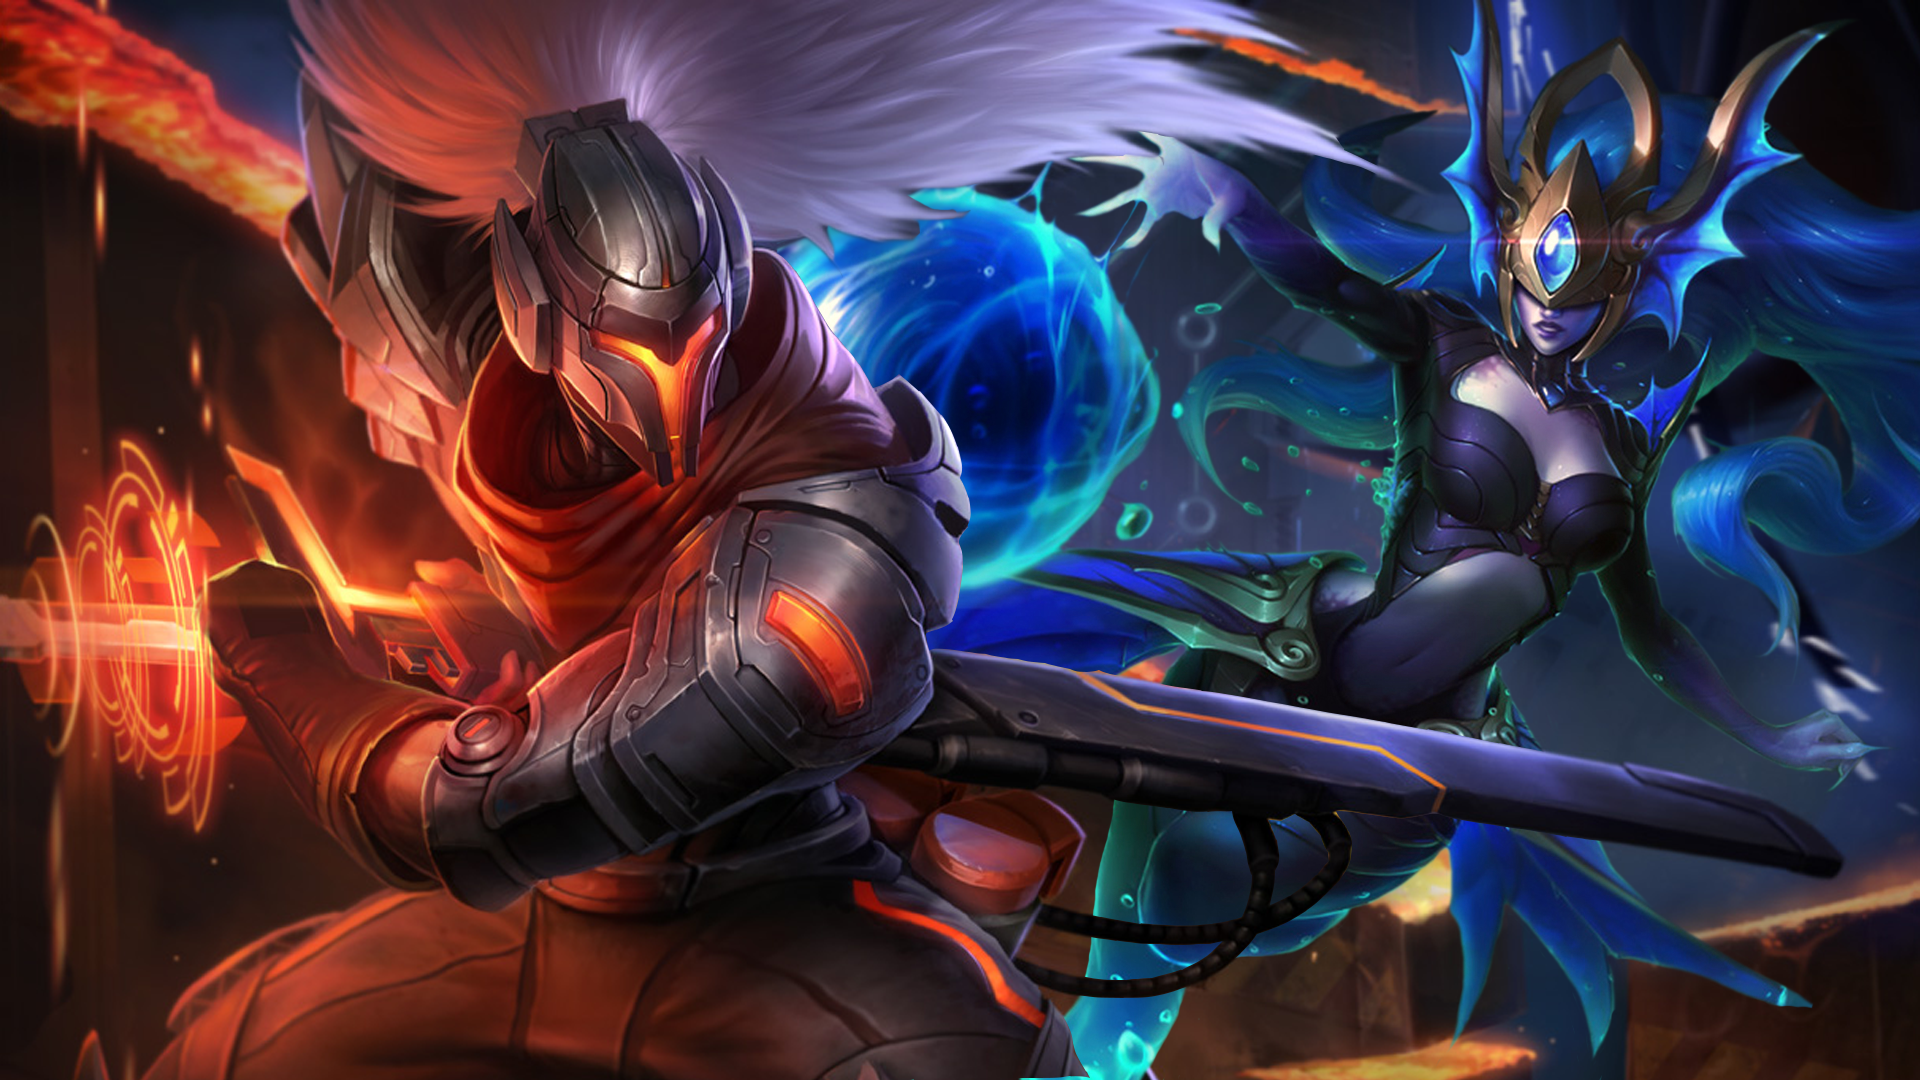 General 1920x1080 League of Legends Yasuo (League of Legends) video games fantasy art PC gaming video game art video game girls fantasy girl armor